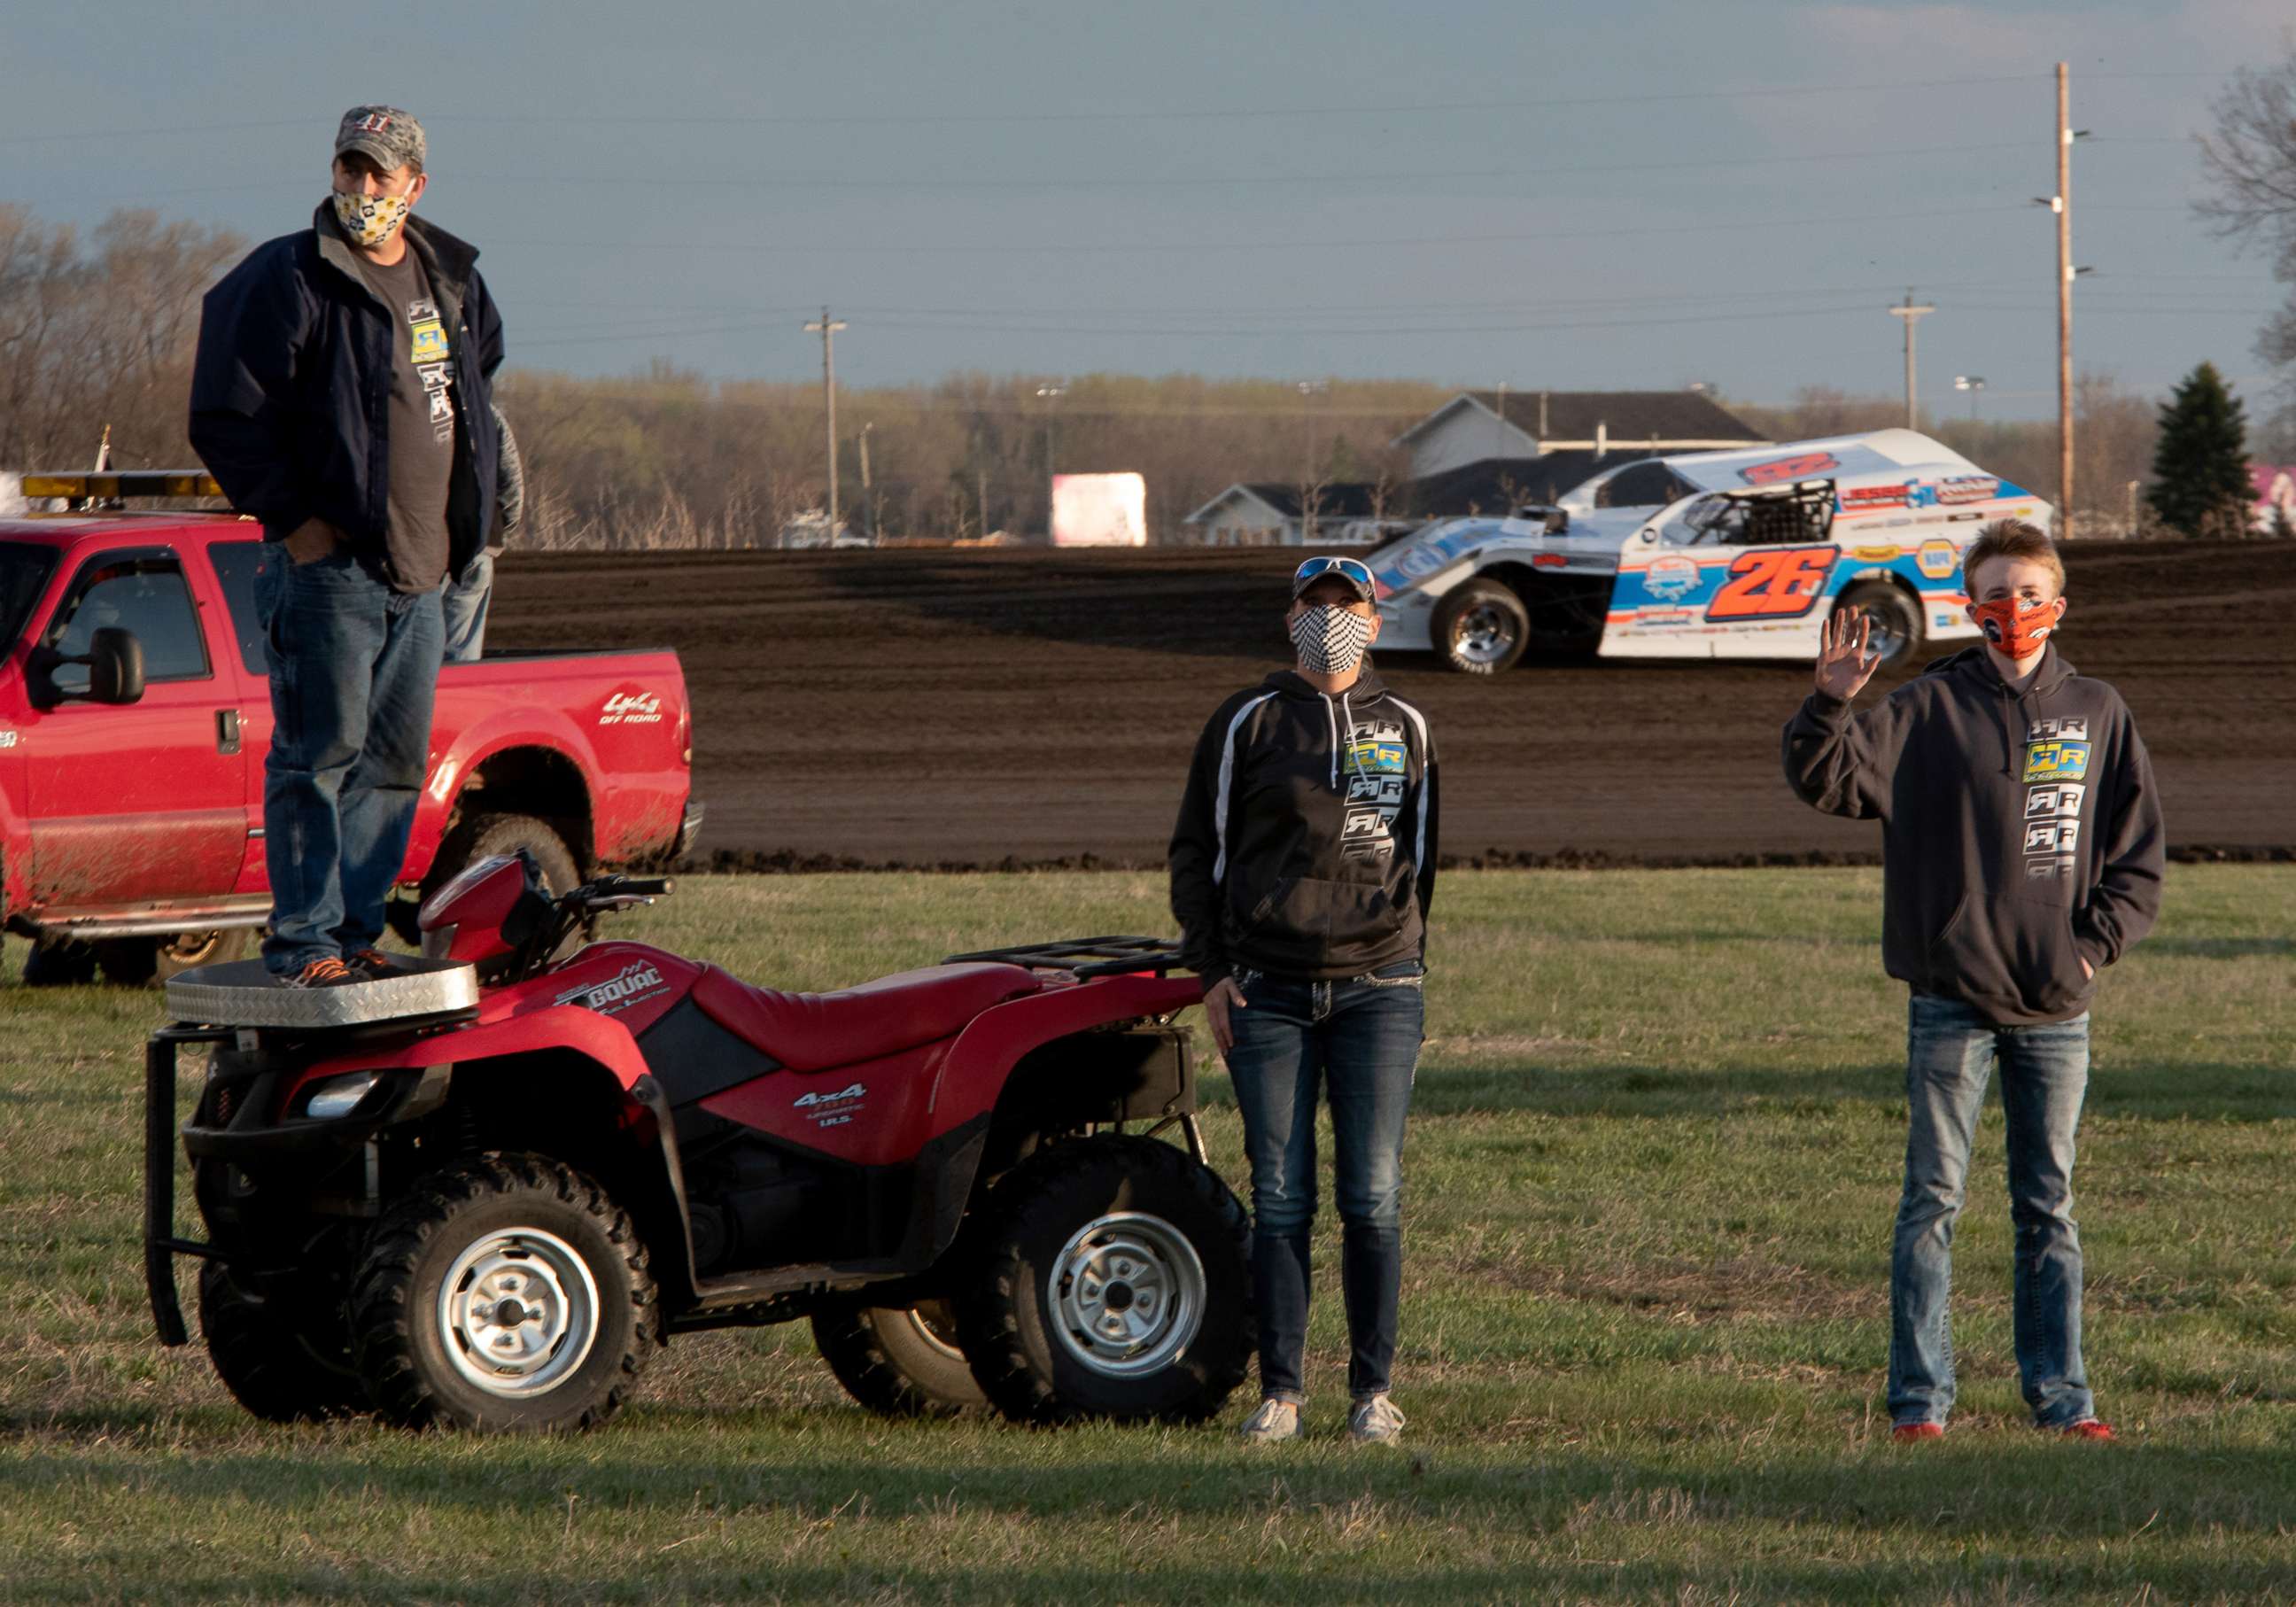 PHOTO: Members of the crew look on during the Open Wheel Nationals at Park Jefferson Speedway on April 25, 2020, in North Sioux City, S.D.